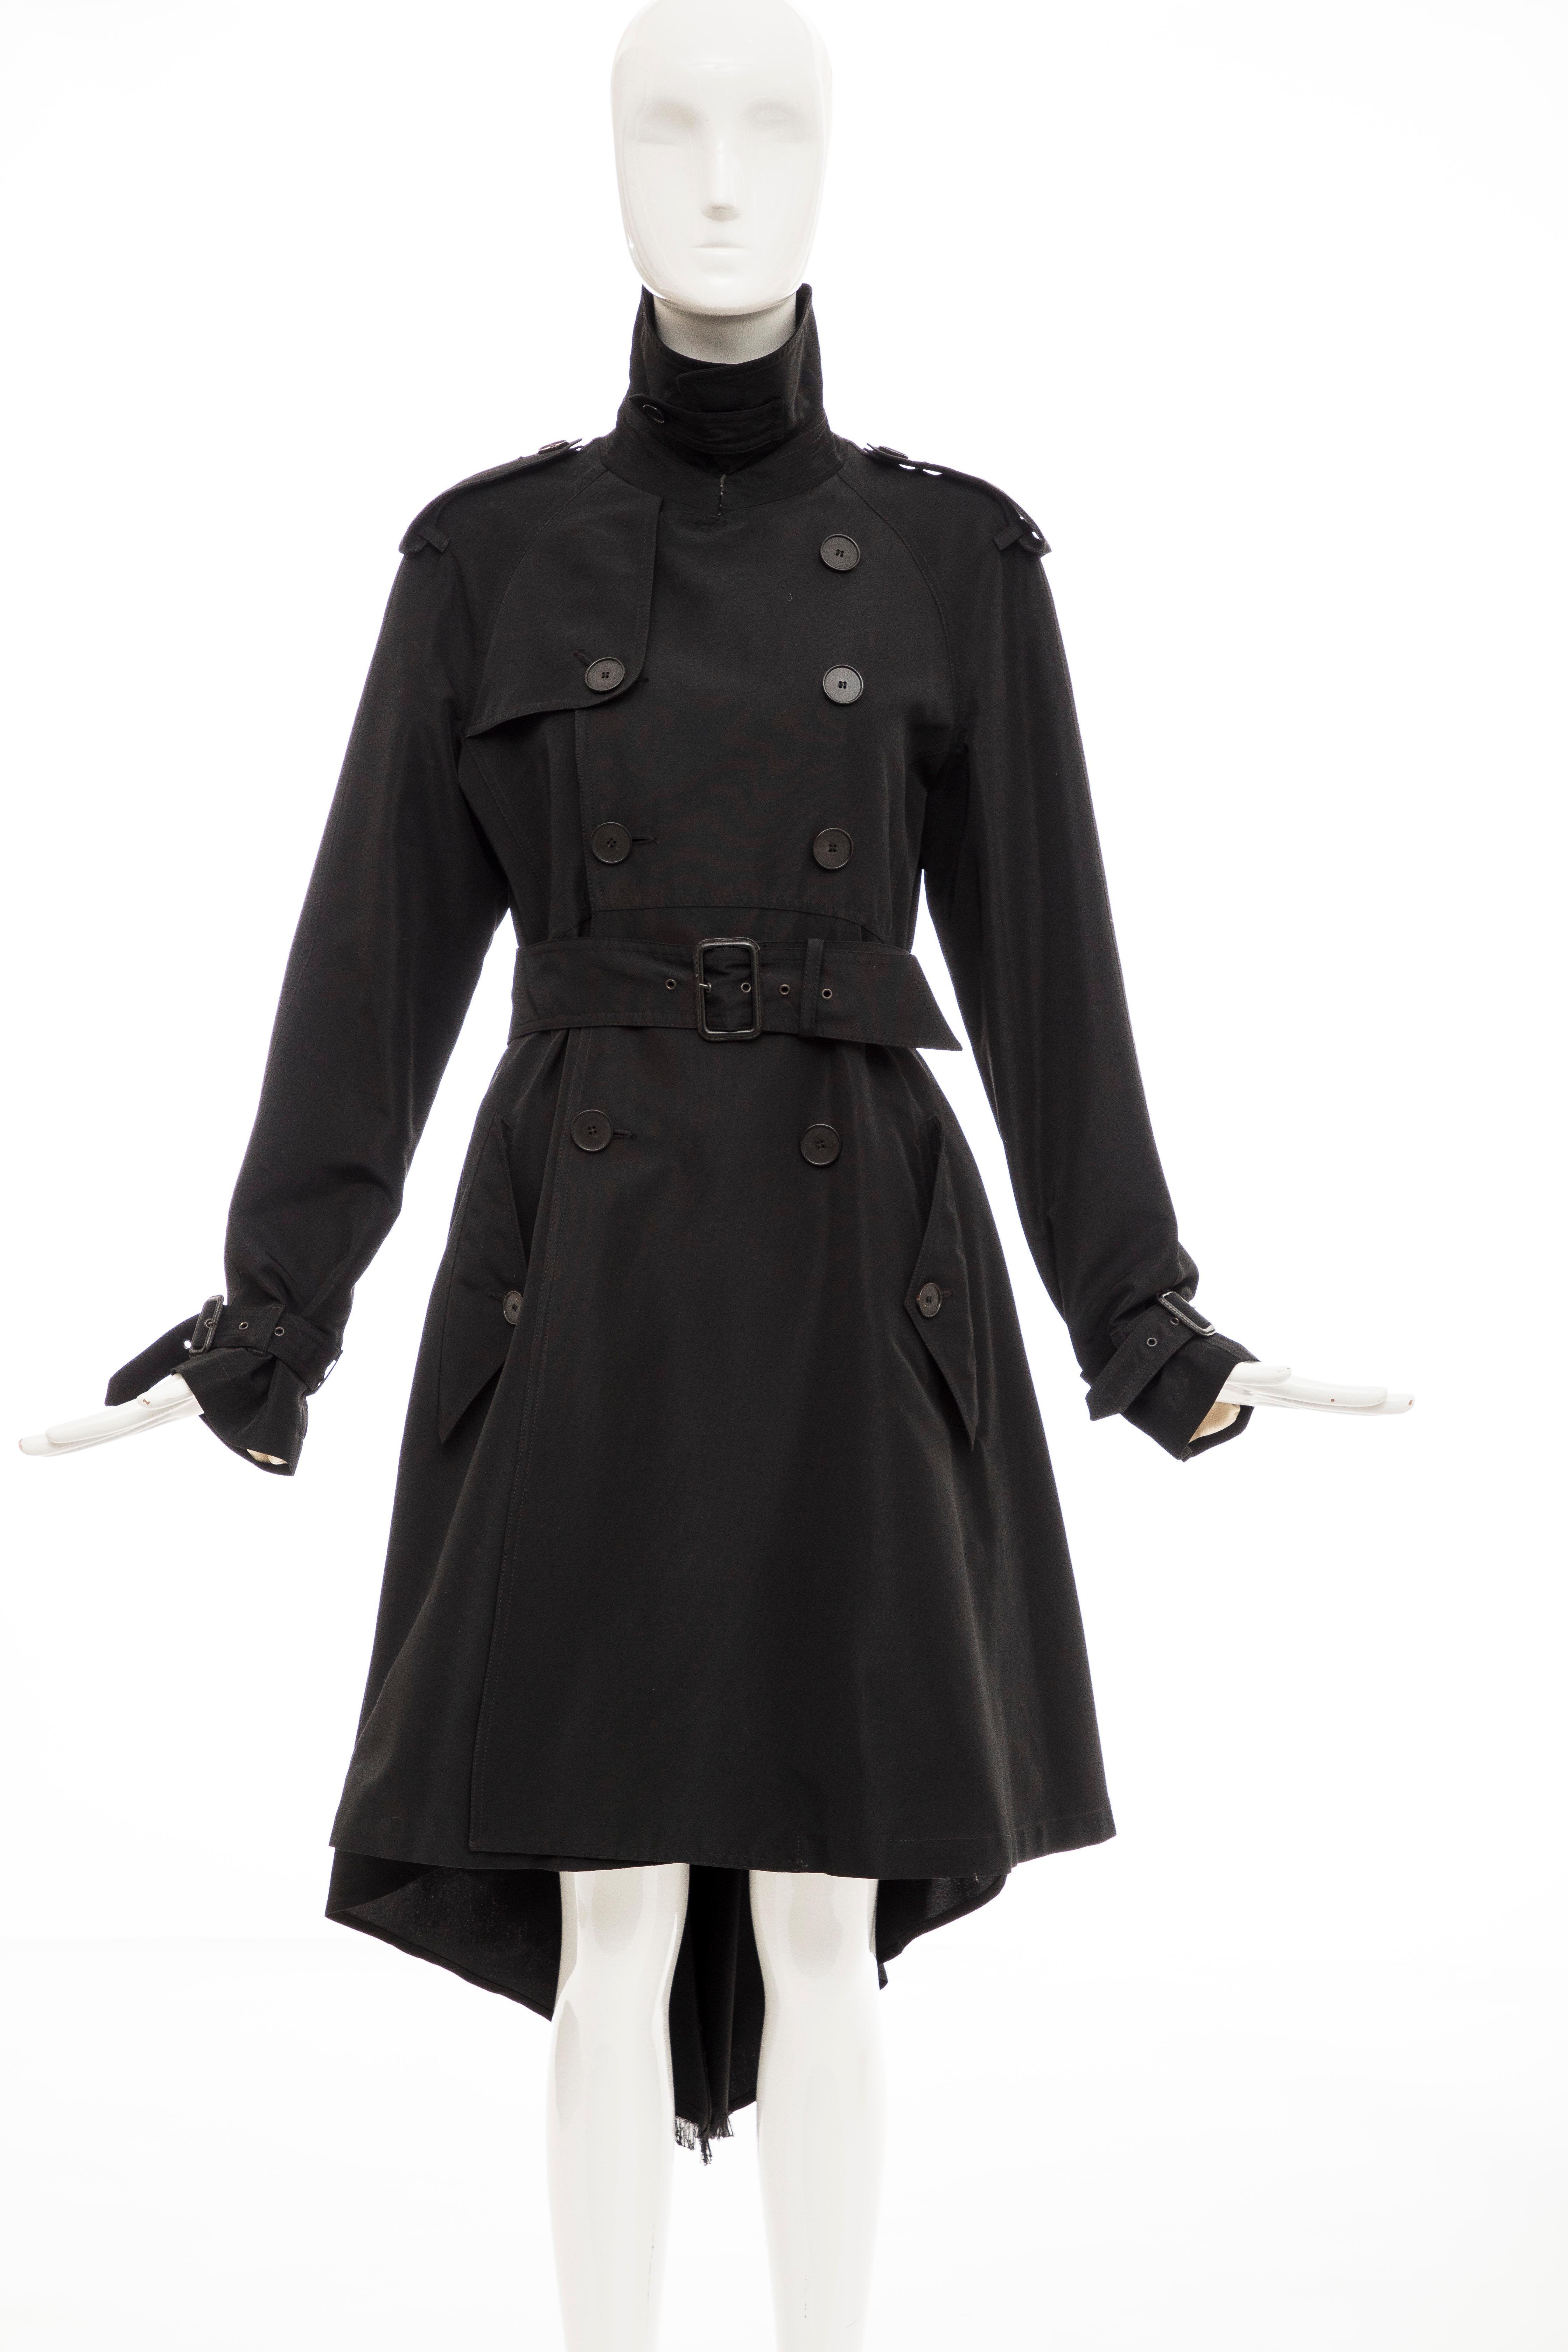  Jean Paul Gaultier, Fall 2007 black double-breasted trench coat with pointed collar, shoulder epaulets, dual flap pockets at sides, adjustable belt at waist featuring bow accent at back, fringe-trimmed high-low hem and button closures at front.